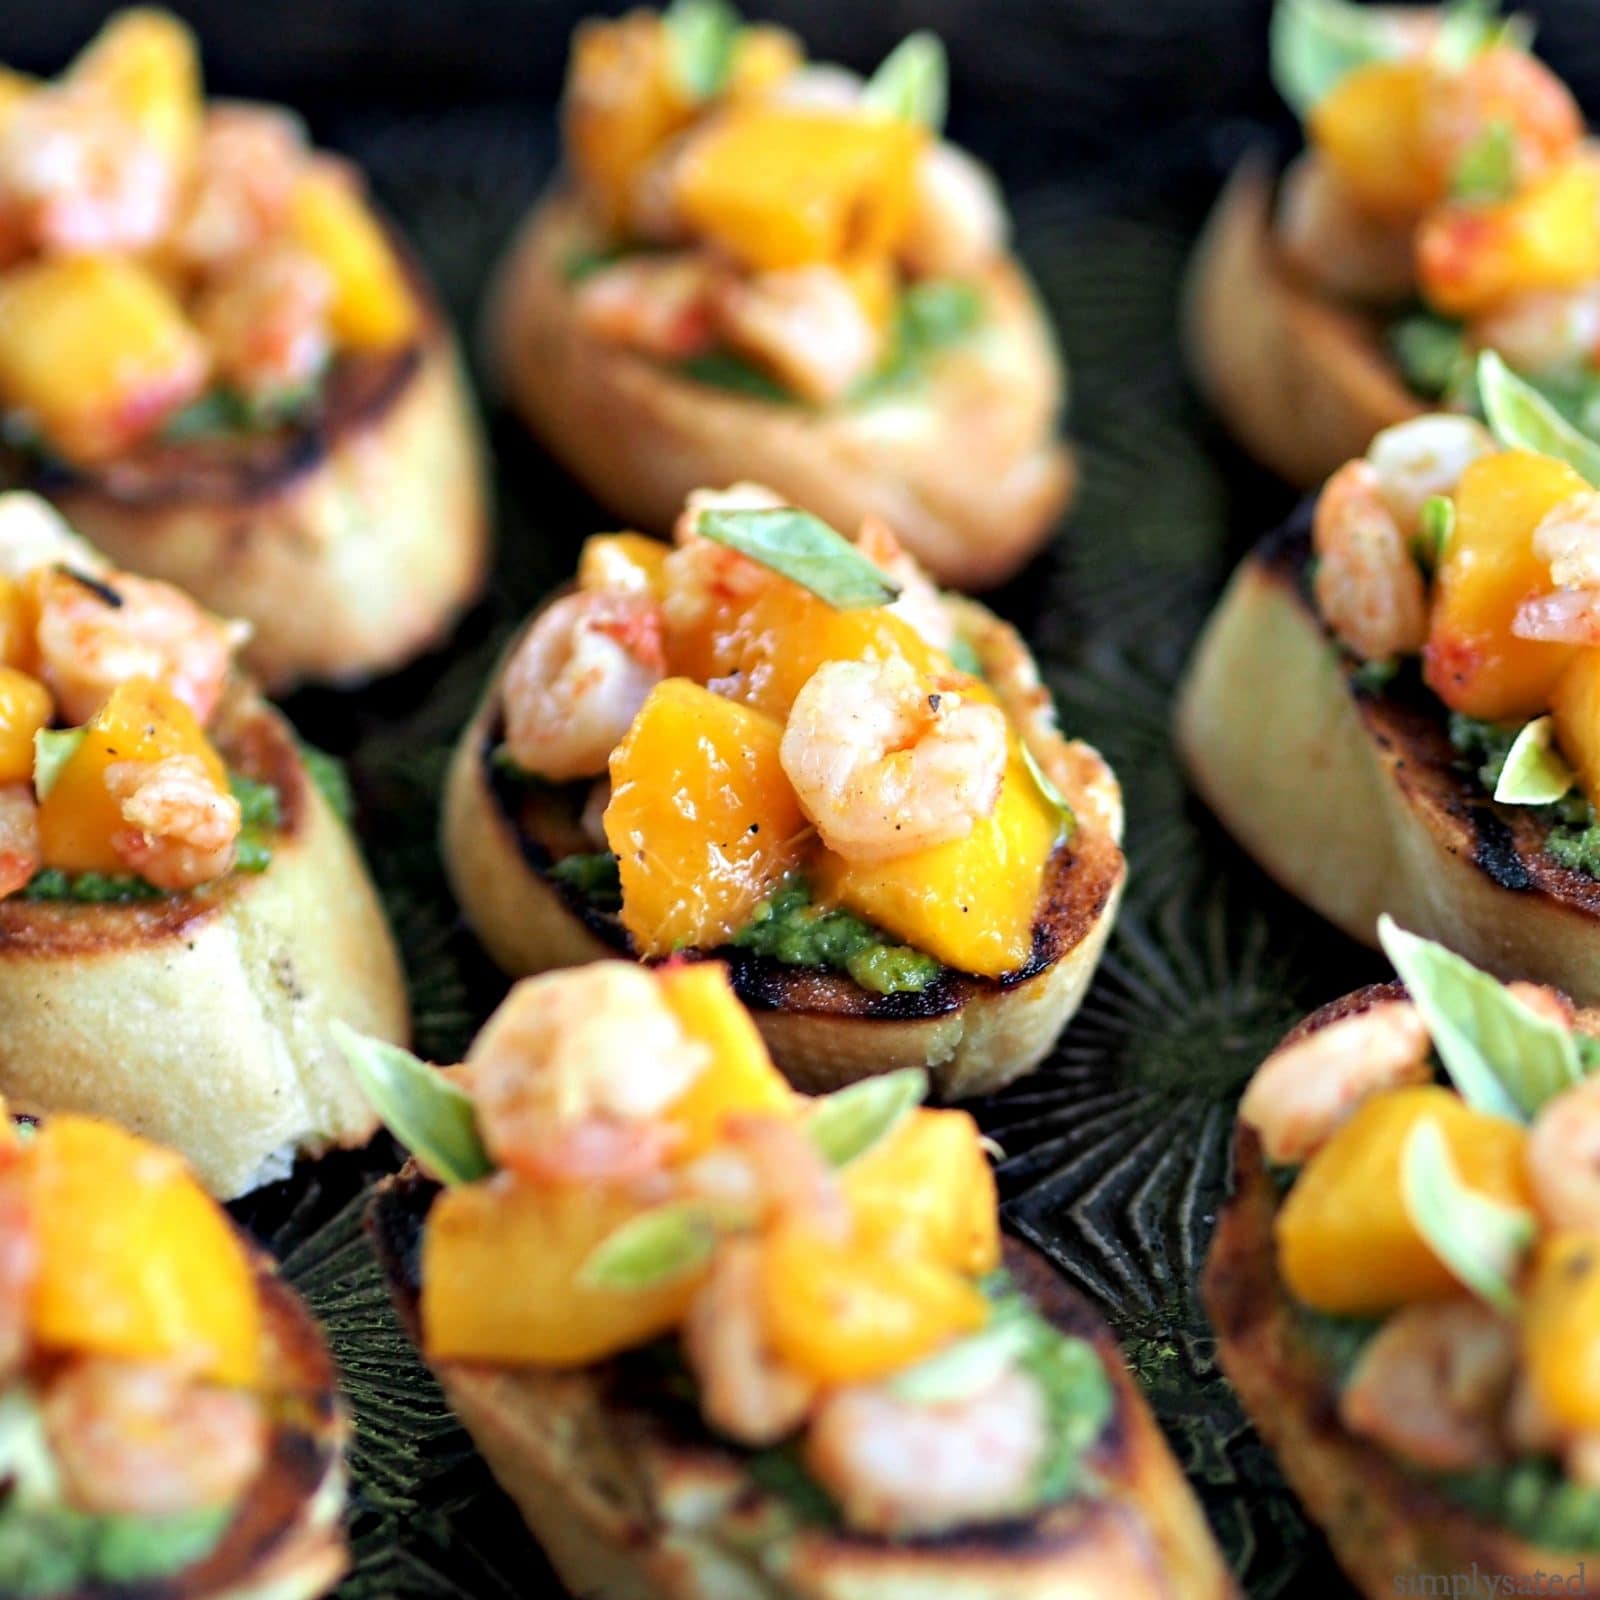 Peach & Shrimp Crostini with Pesto is an easy, elegant appetizer. Perfect for family or friends. www.simplysated.com